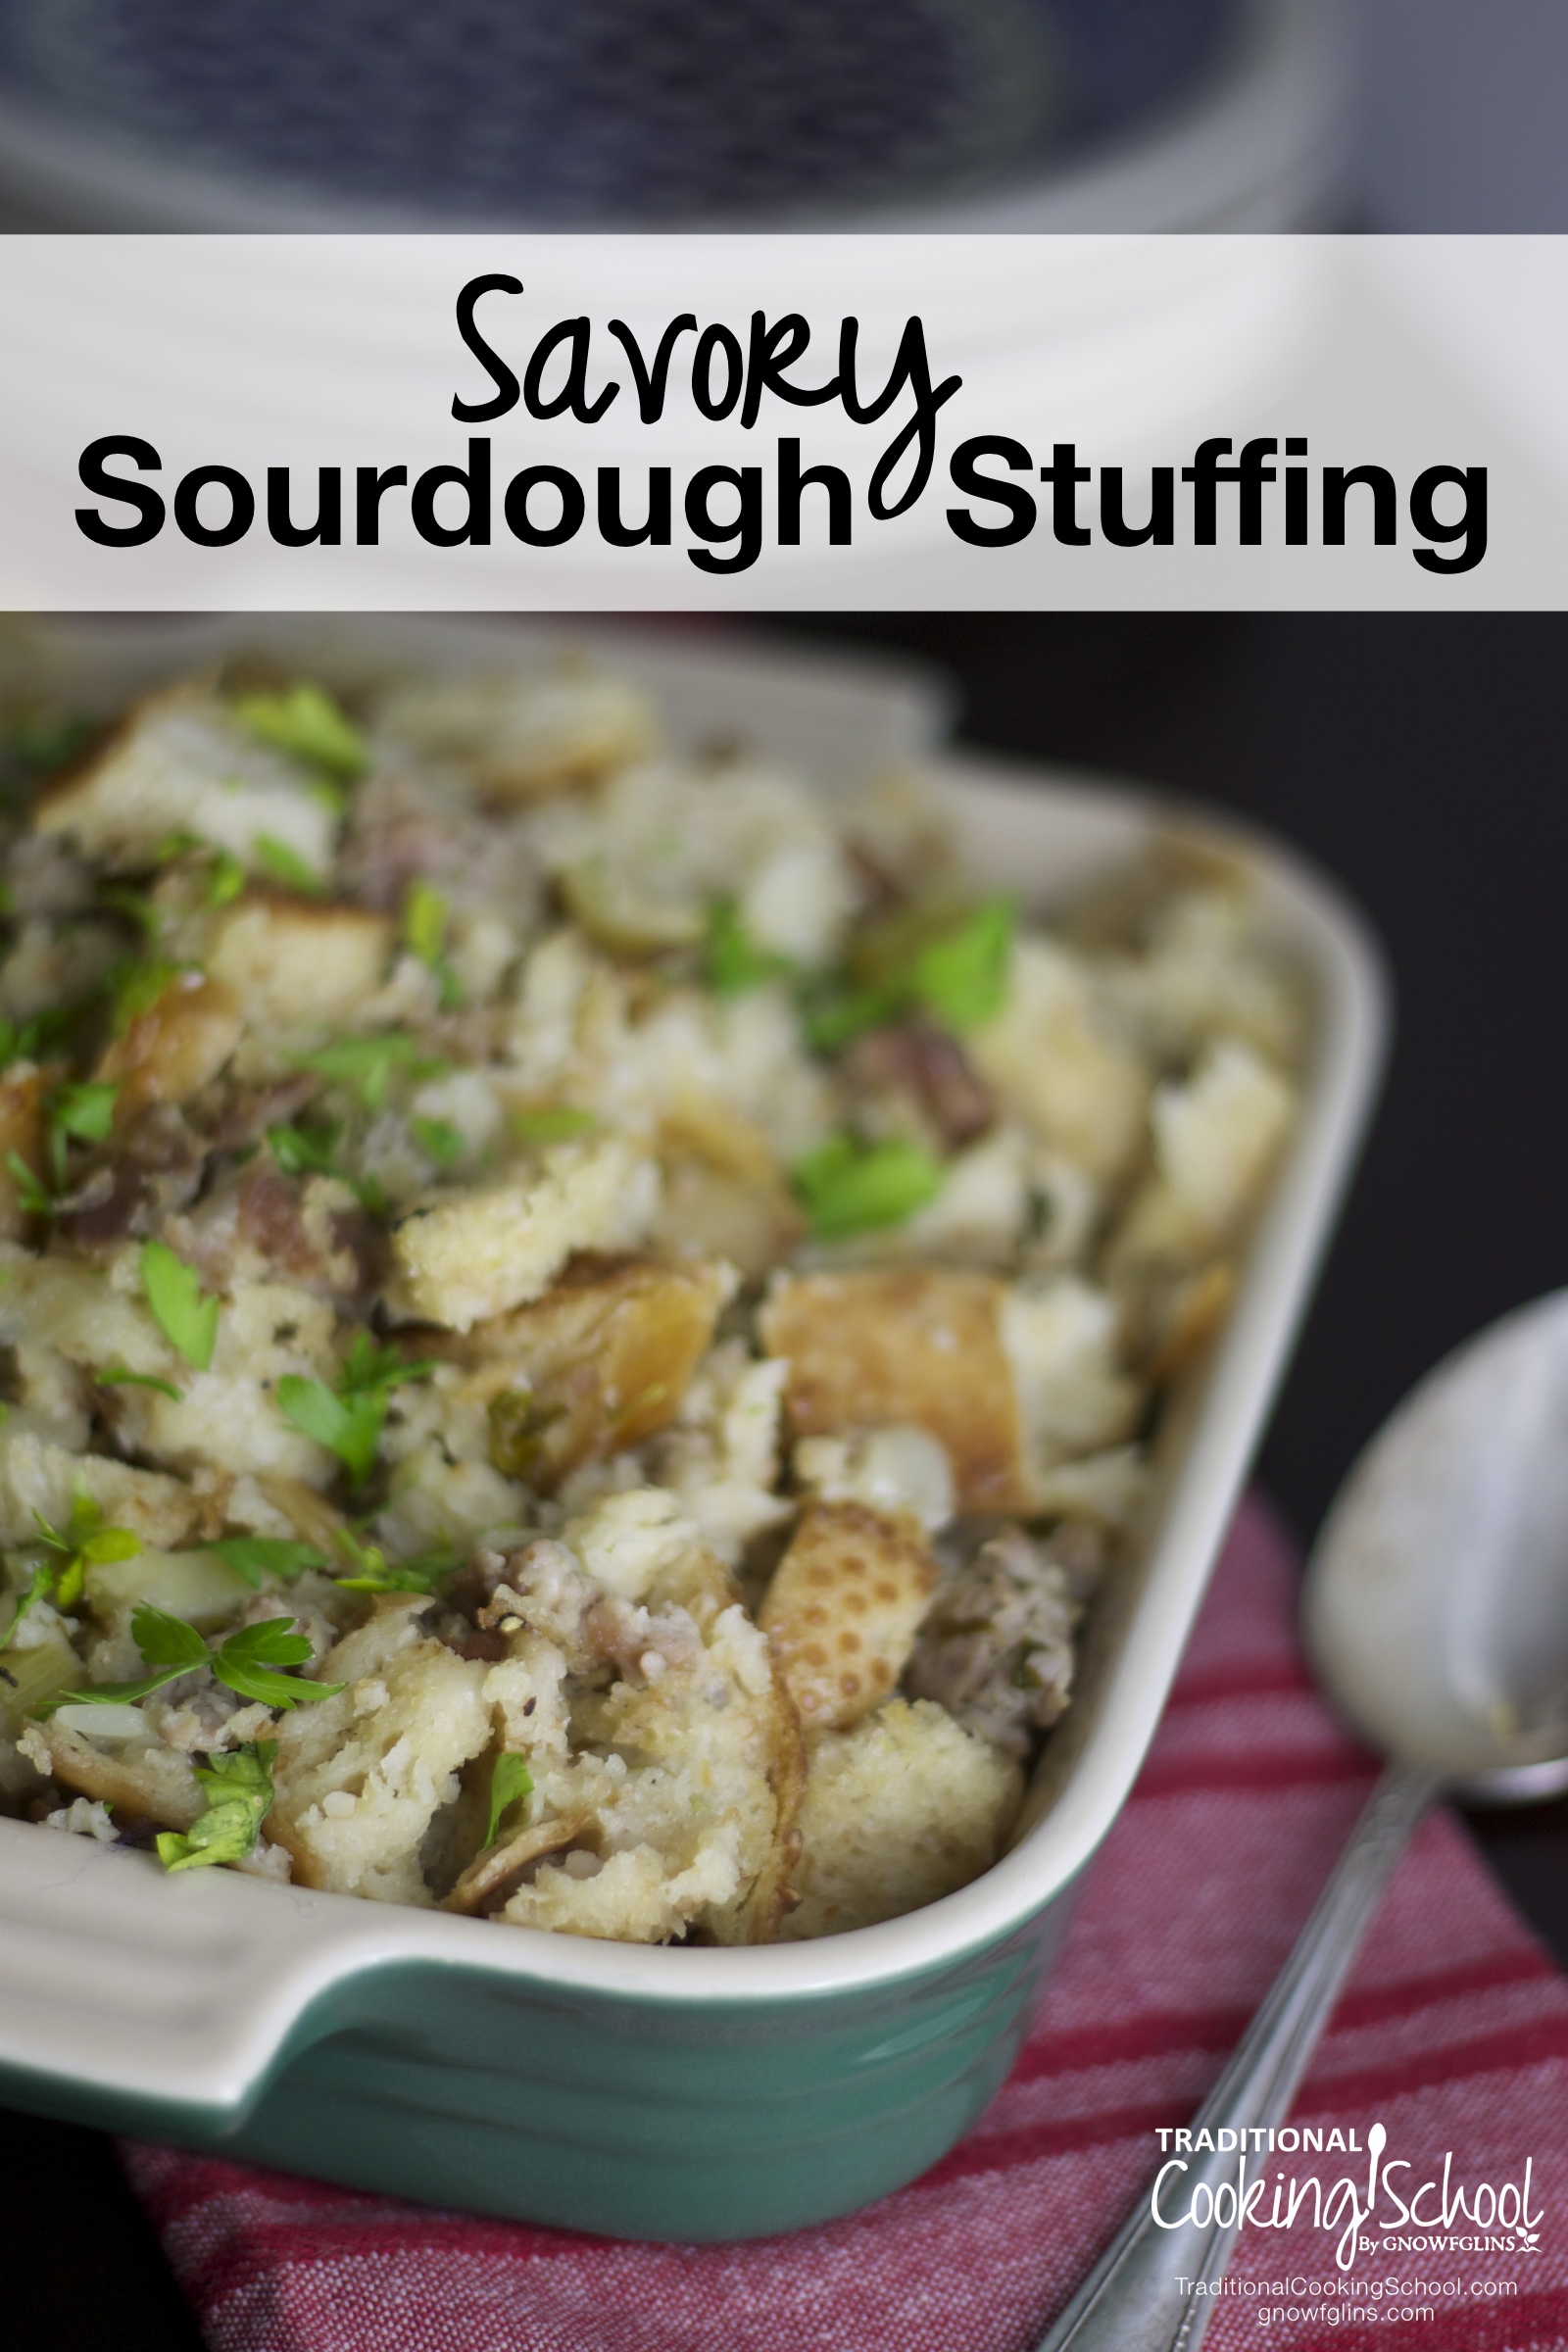 Savory Sourdough Stuffing | Sometimes I'm just in a stuffing mood... Then the big questions are: what can I serve with it? What new twist can I create? I initially resisted adding sausage to my stuffing. Finally, I caved, and I'm so glad I did! My newest version is a savory sourdough stuffing with Italian sausage! | TraditionalCookingSchool.com